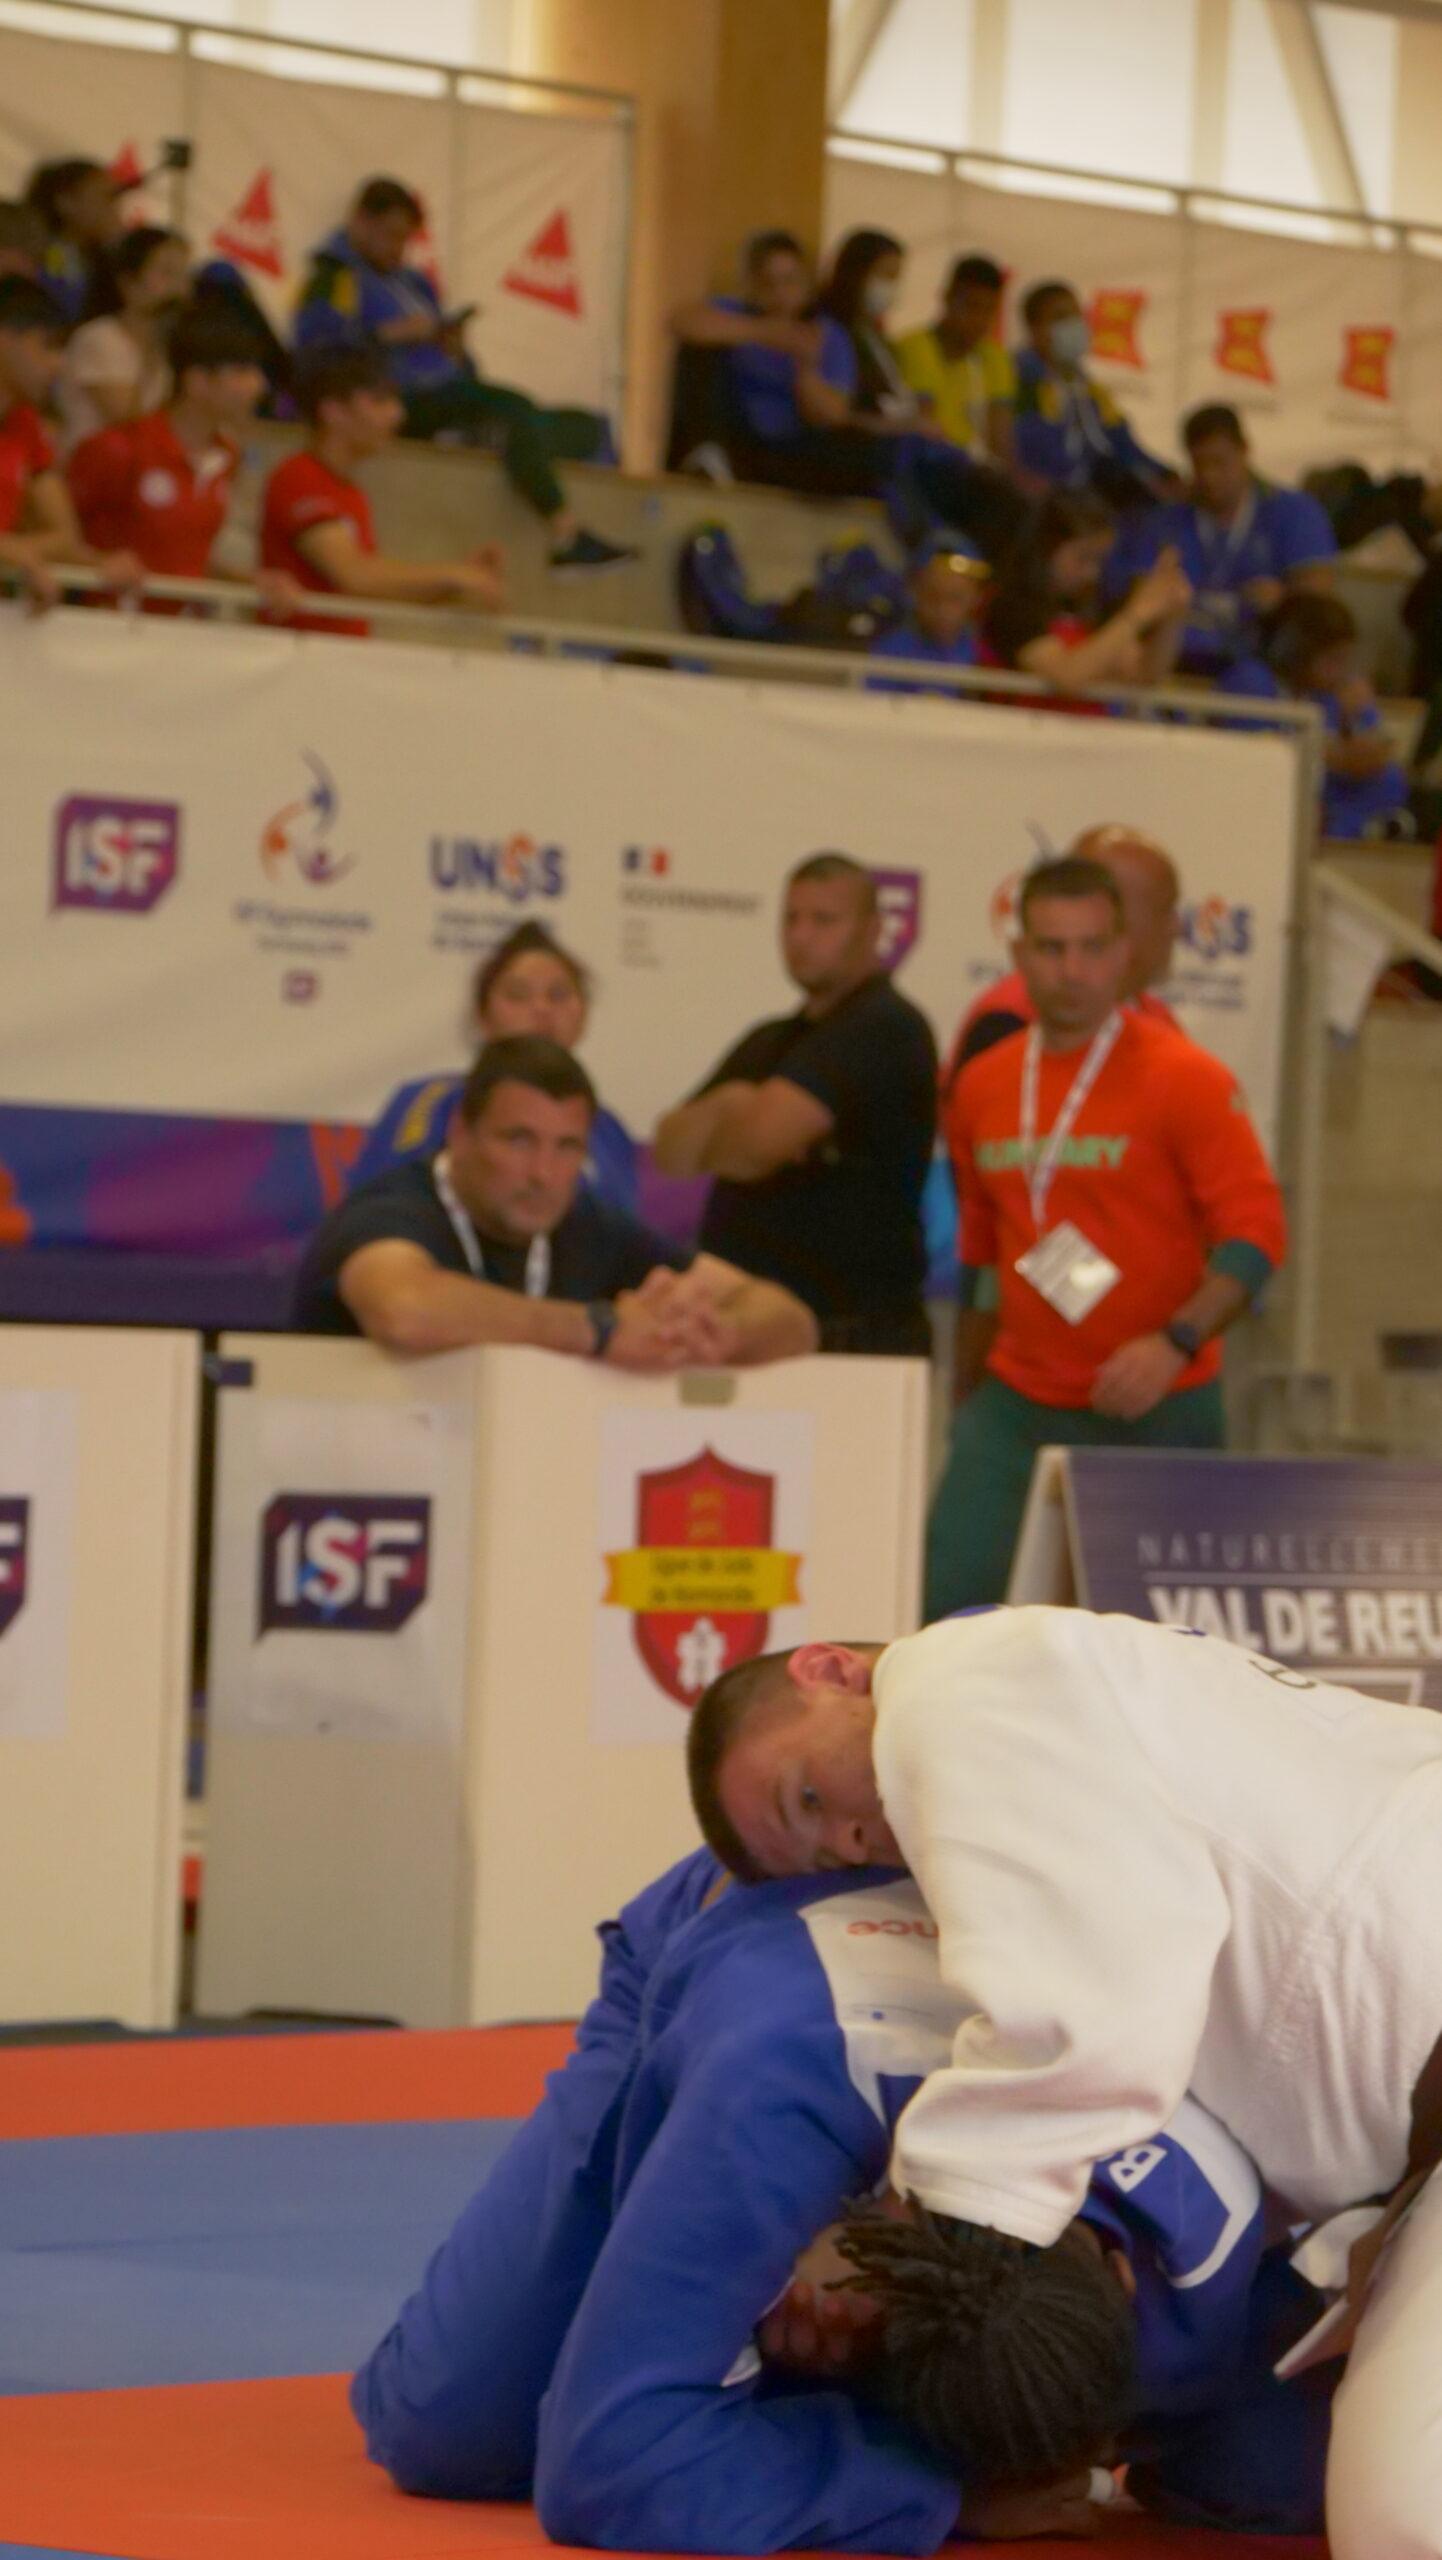 A recap of Day 7 at the ISF Gymnasiade Normandy 2022